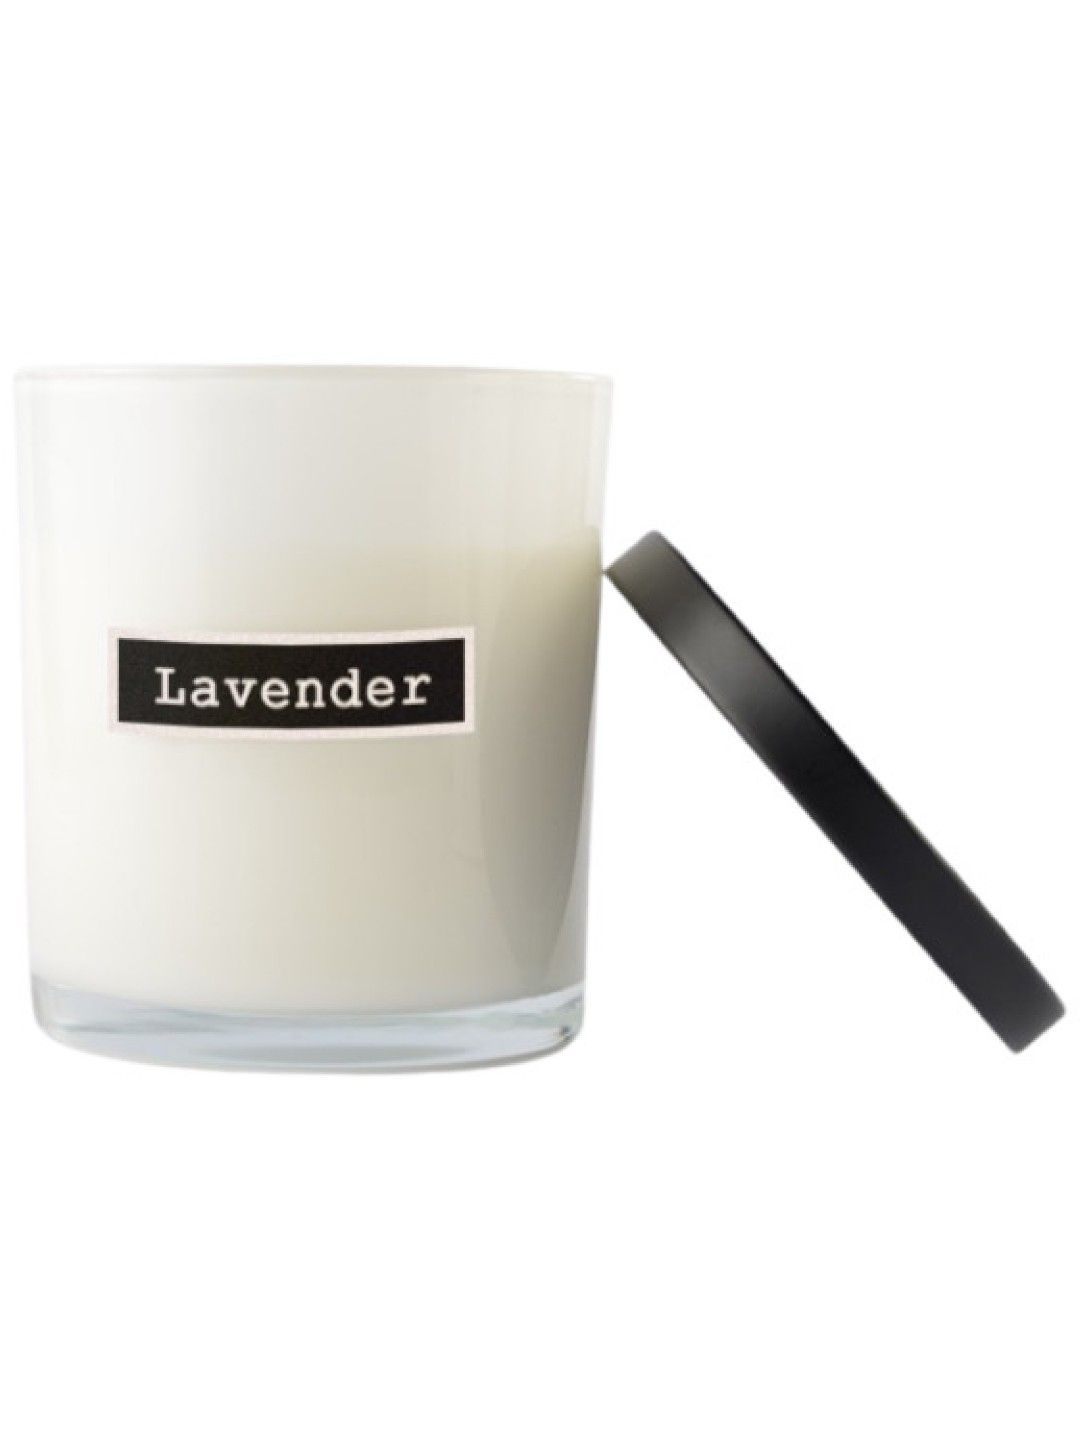 Honey and Wine Lavender Scented Soy Candle (10oz)